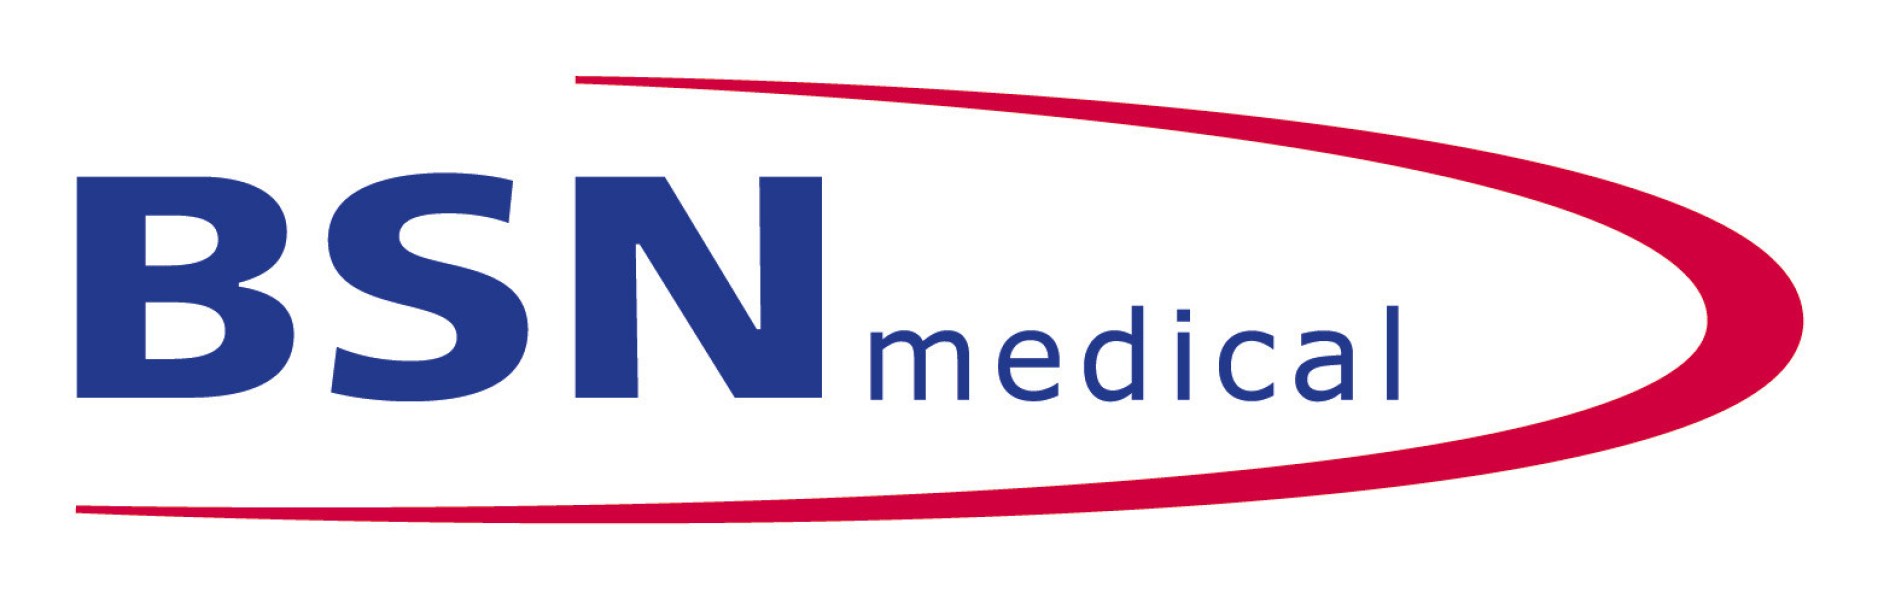 BSN-medical-color-logo-low-res